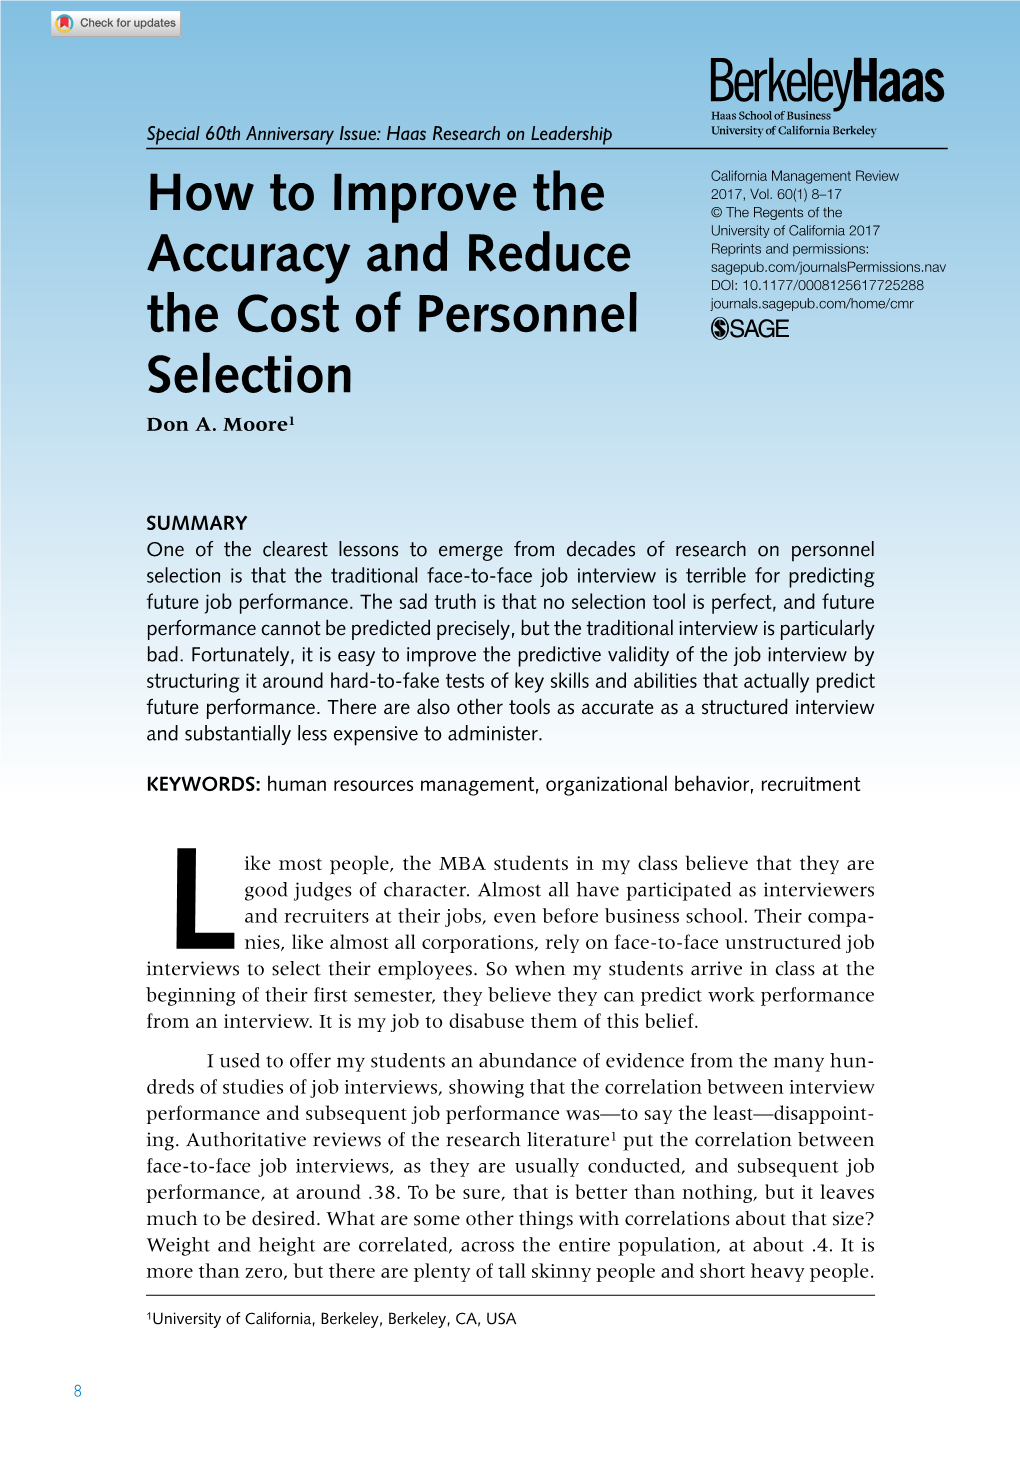 How to Improve the Accuracy and Reduce the Cost of Personnel Selection 9